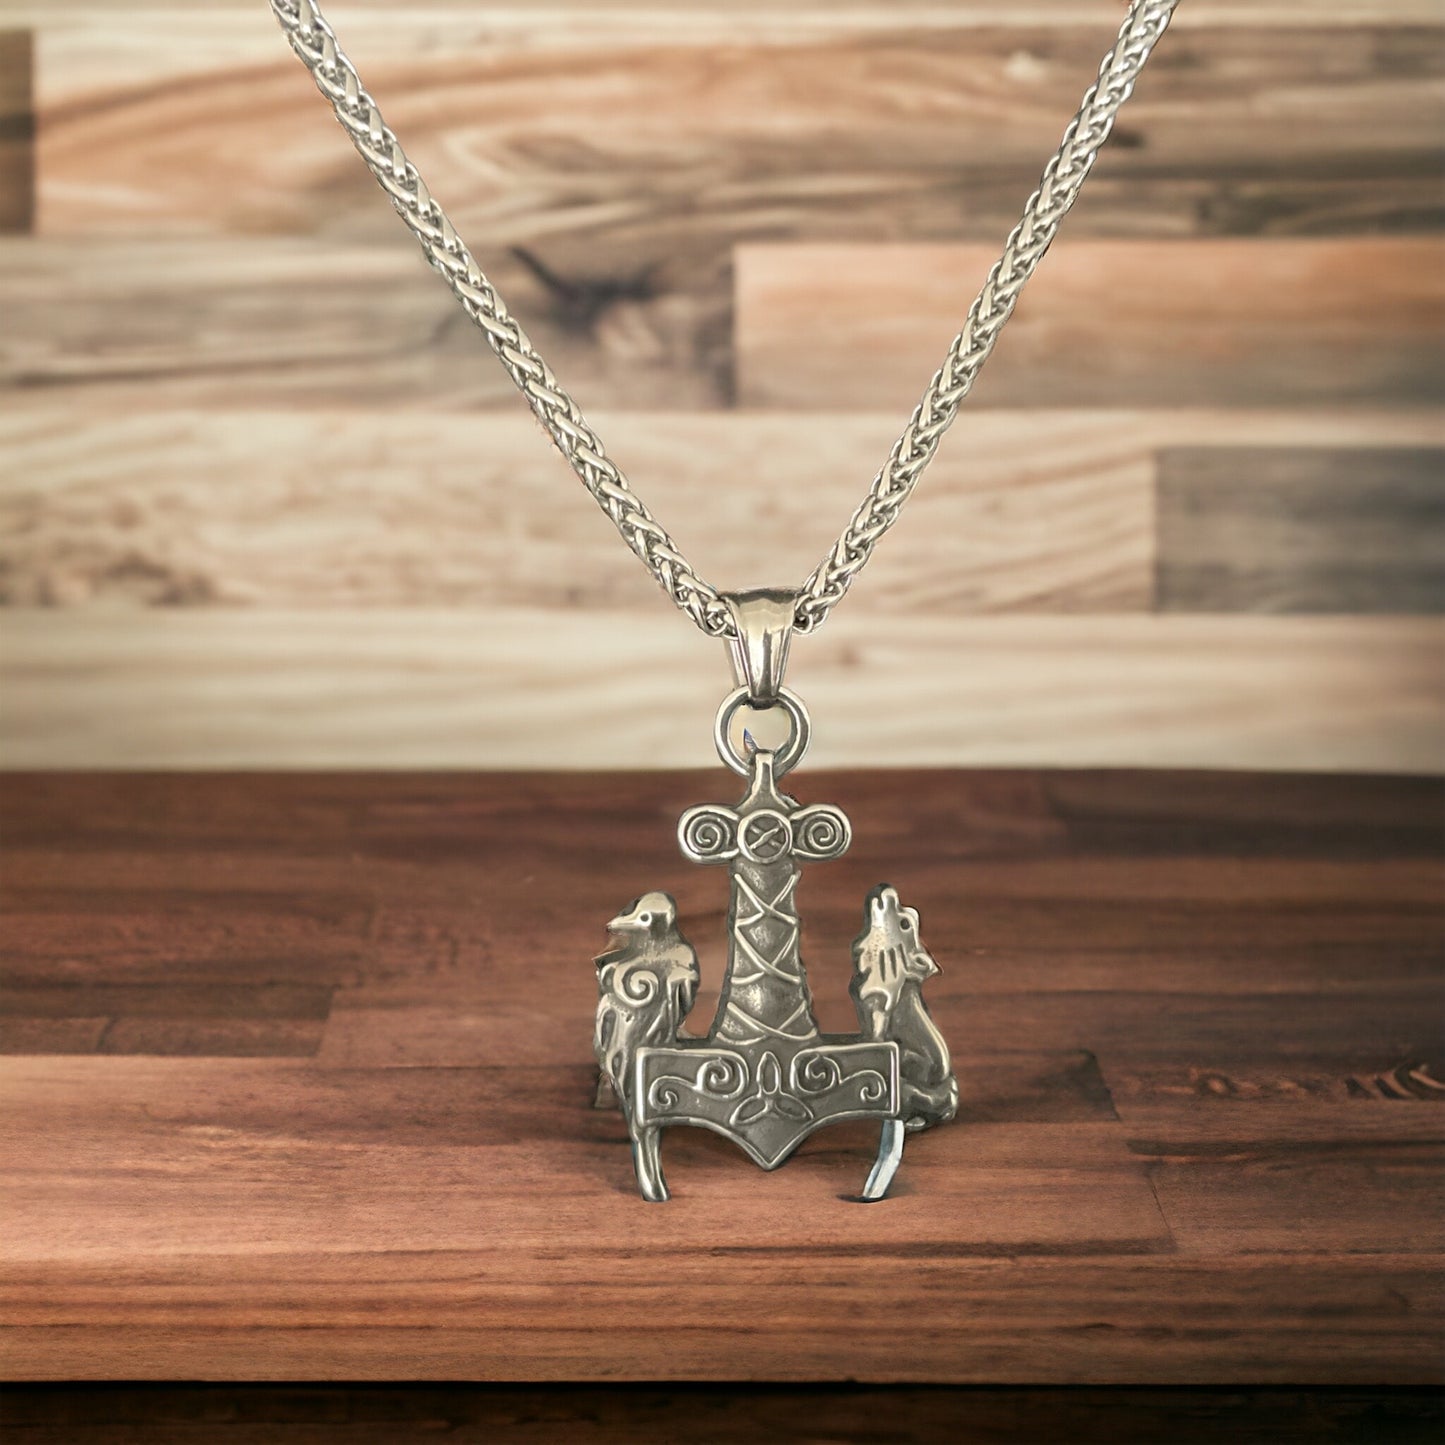 316L Surgical Stainless Steel Viking Norse Thor’s Hammer Mjolnir Pendant + Free Chain Necklace